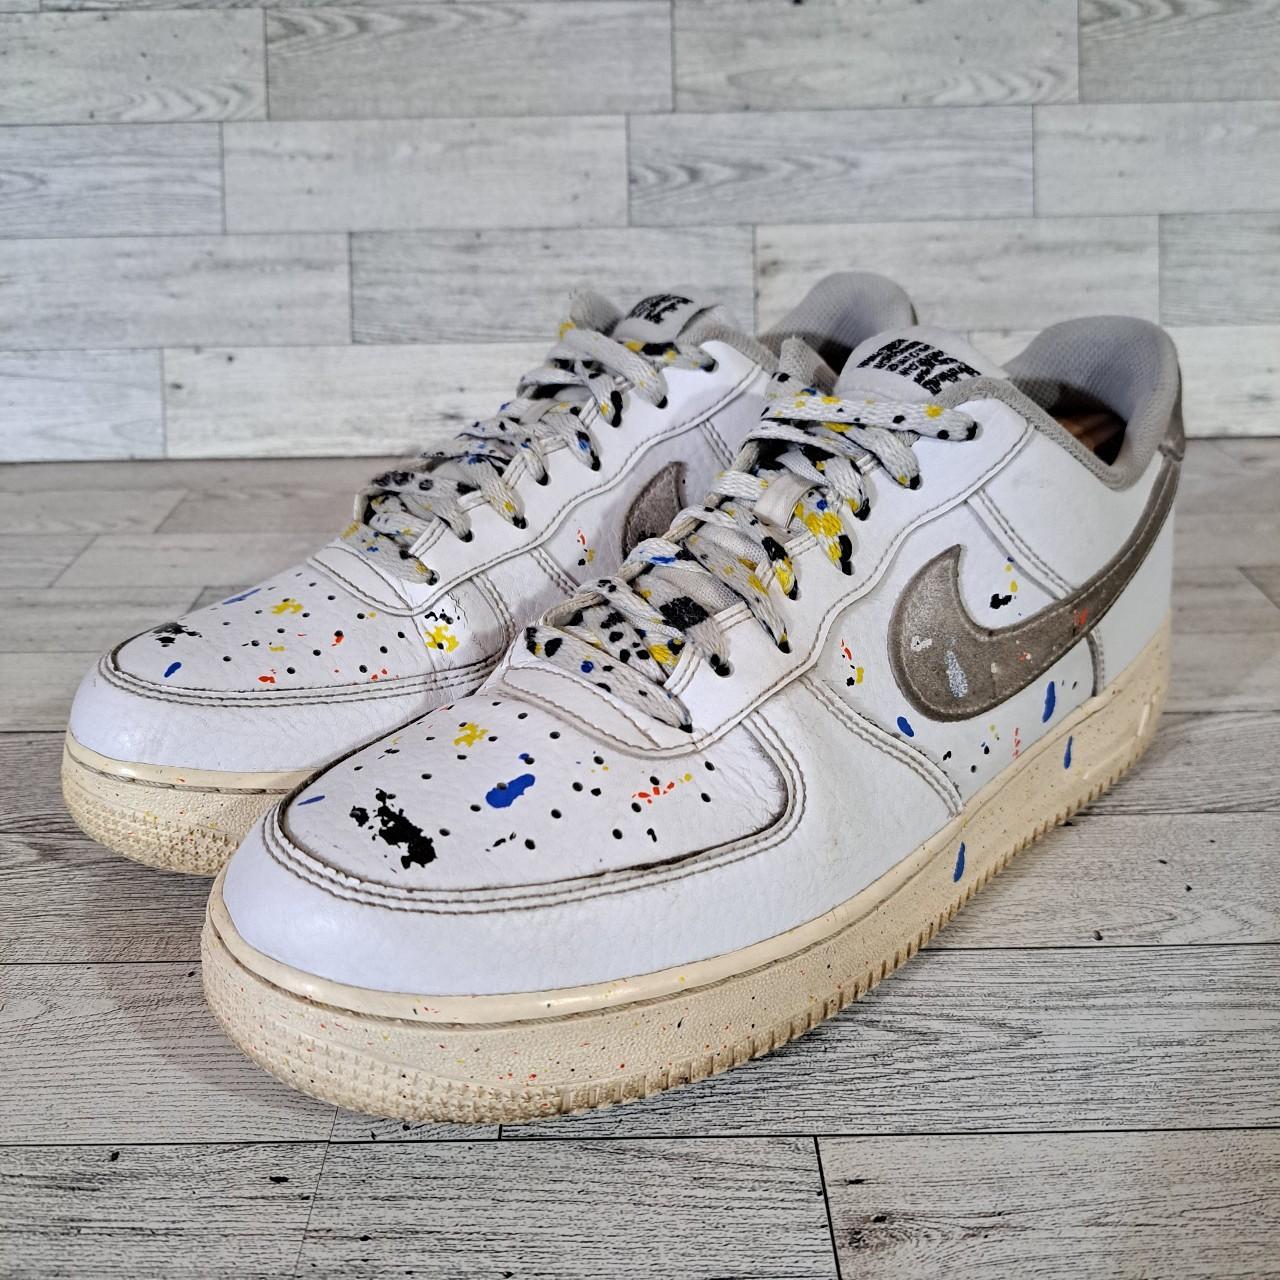 Nike trainer Air Force 1 Low 07 LV8 Paint Splatter White CZ0339